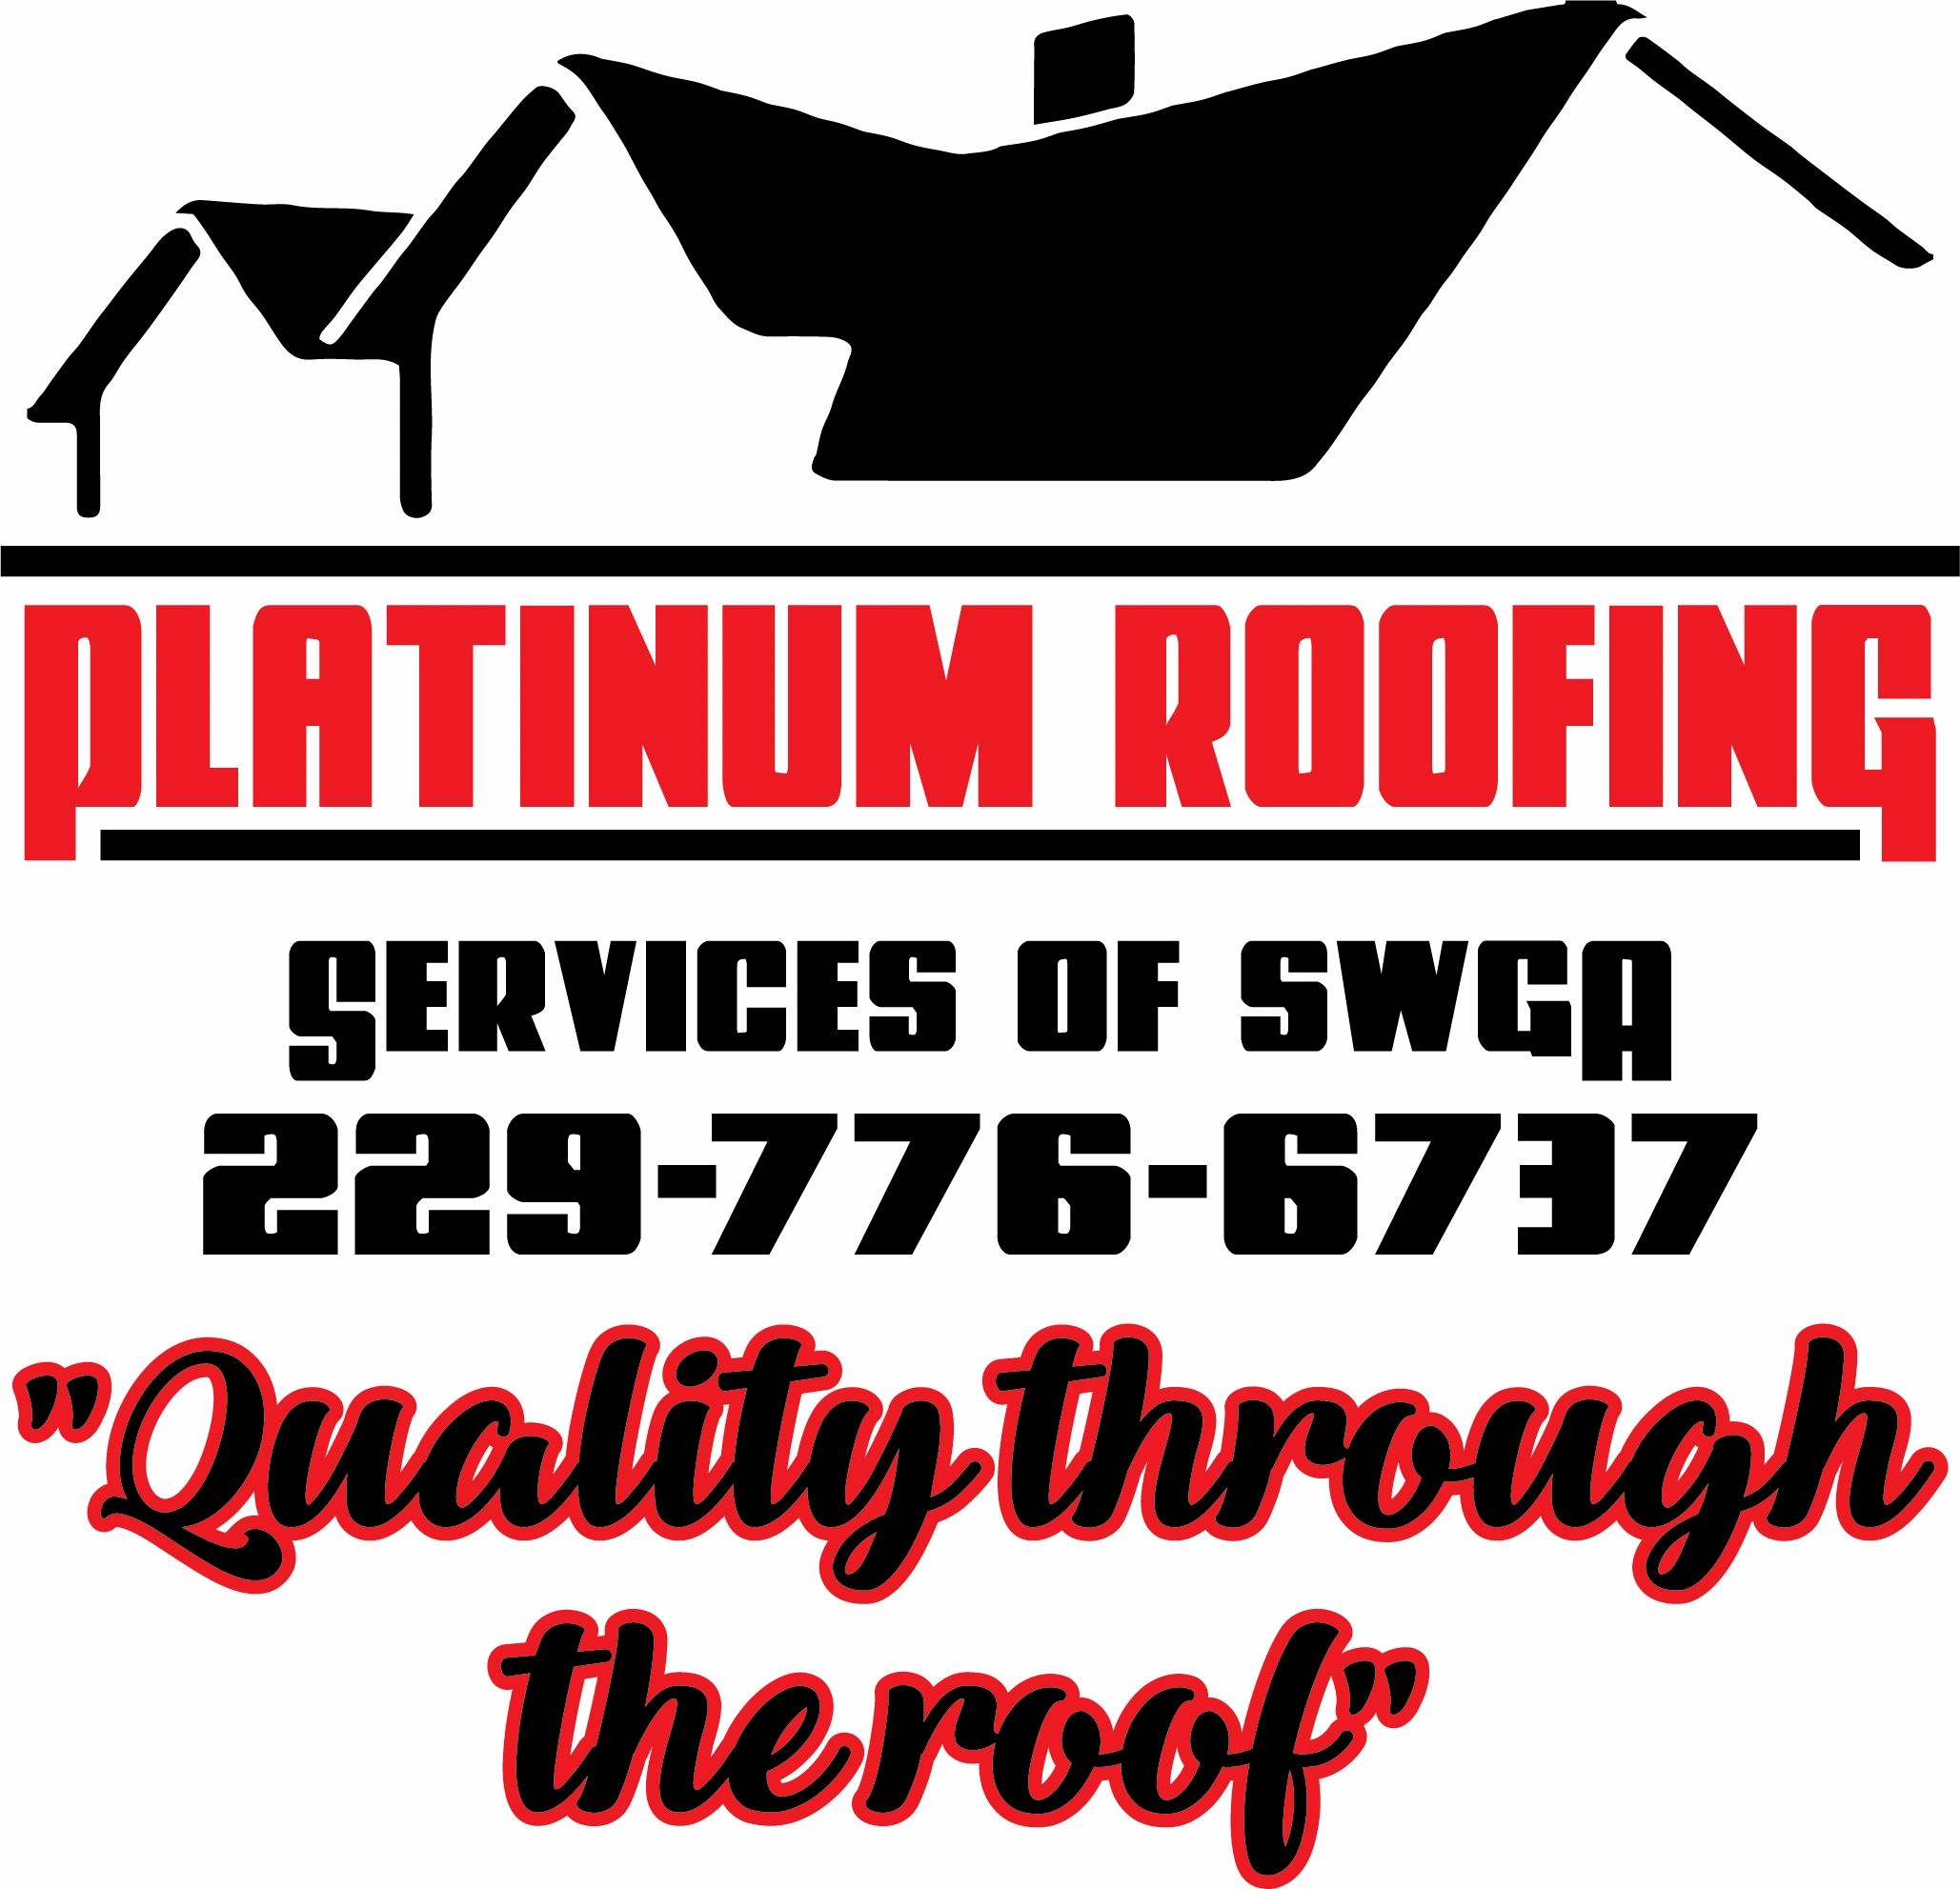 Platinum Roofing Services of SWGA - Roofing, Construction